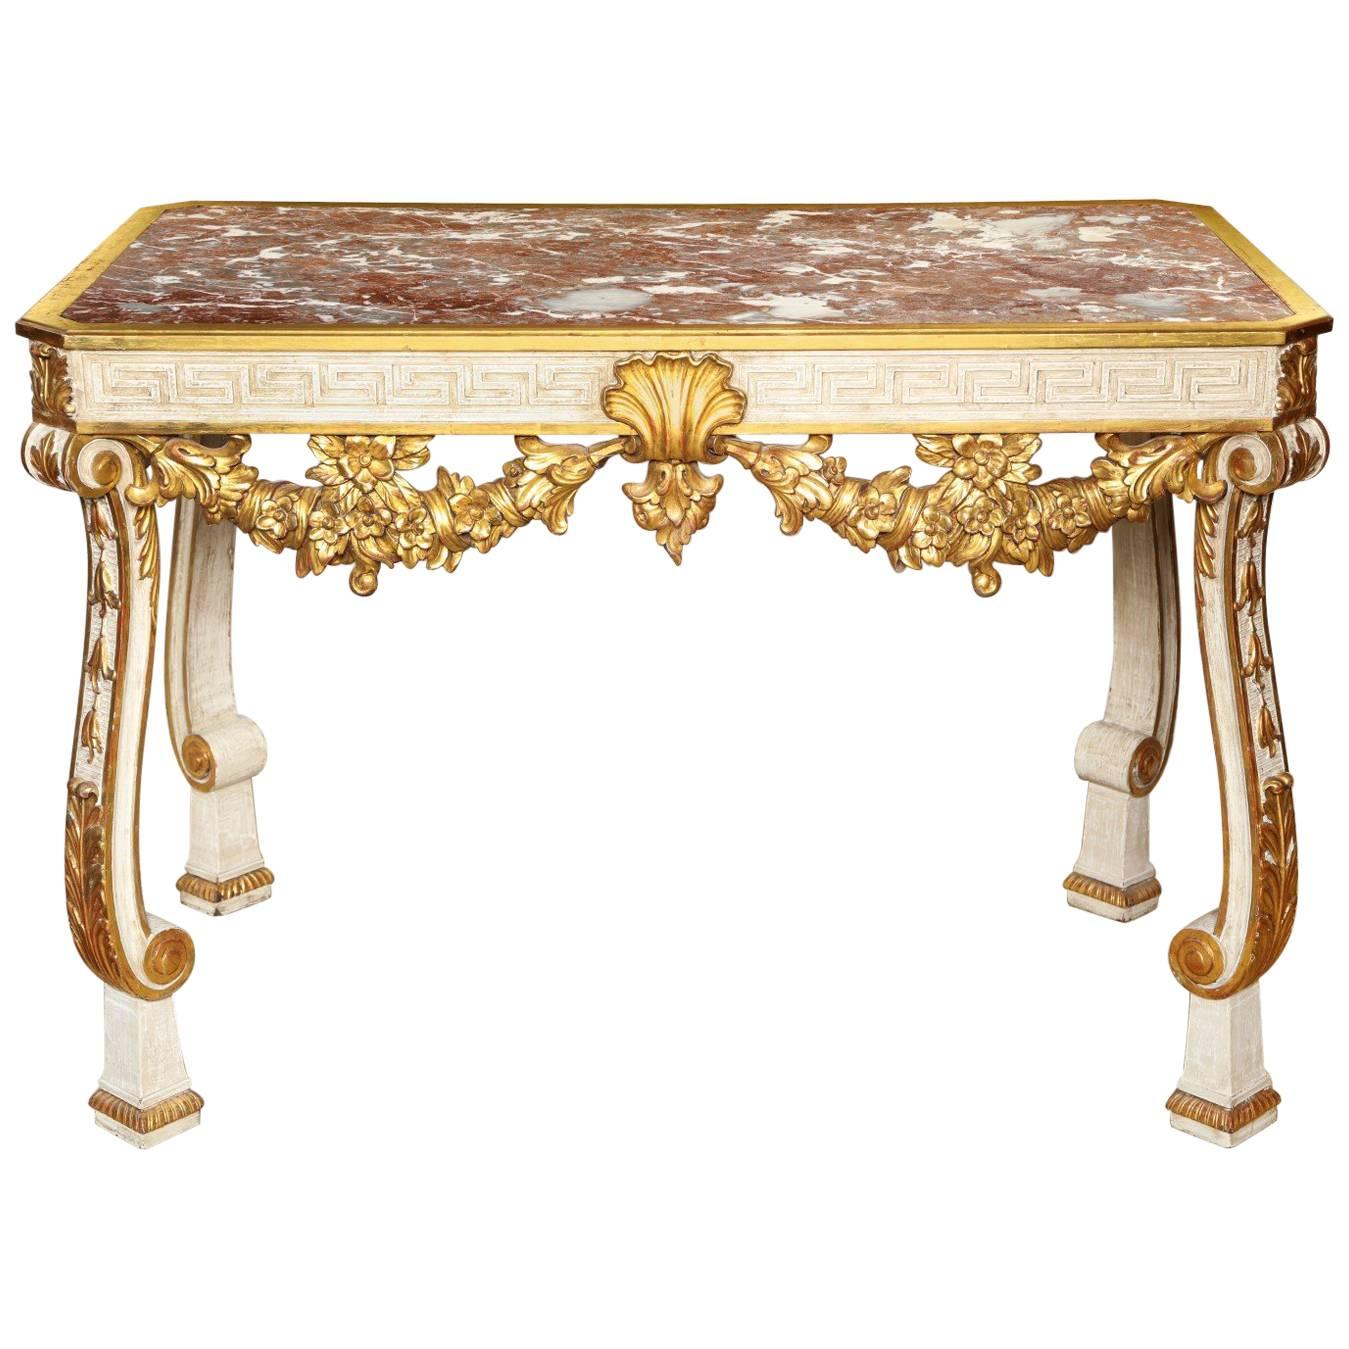 George II Style Parcel-Gilt Cream Painted Console Table